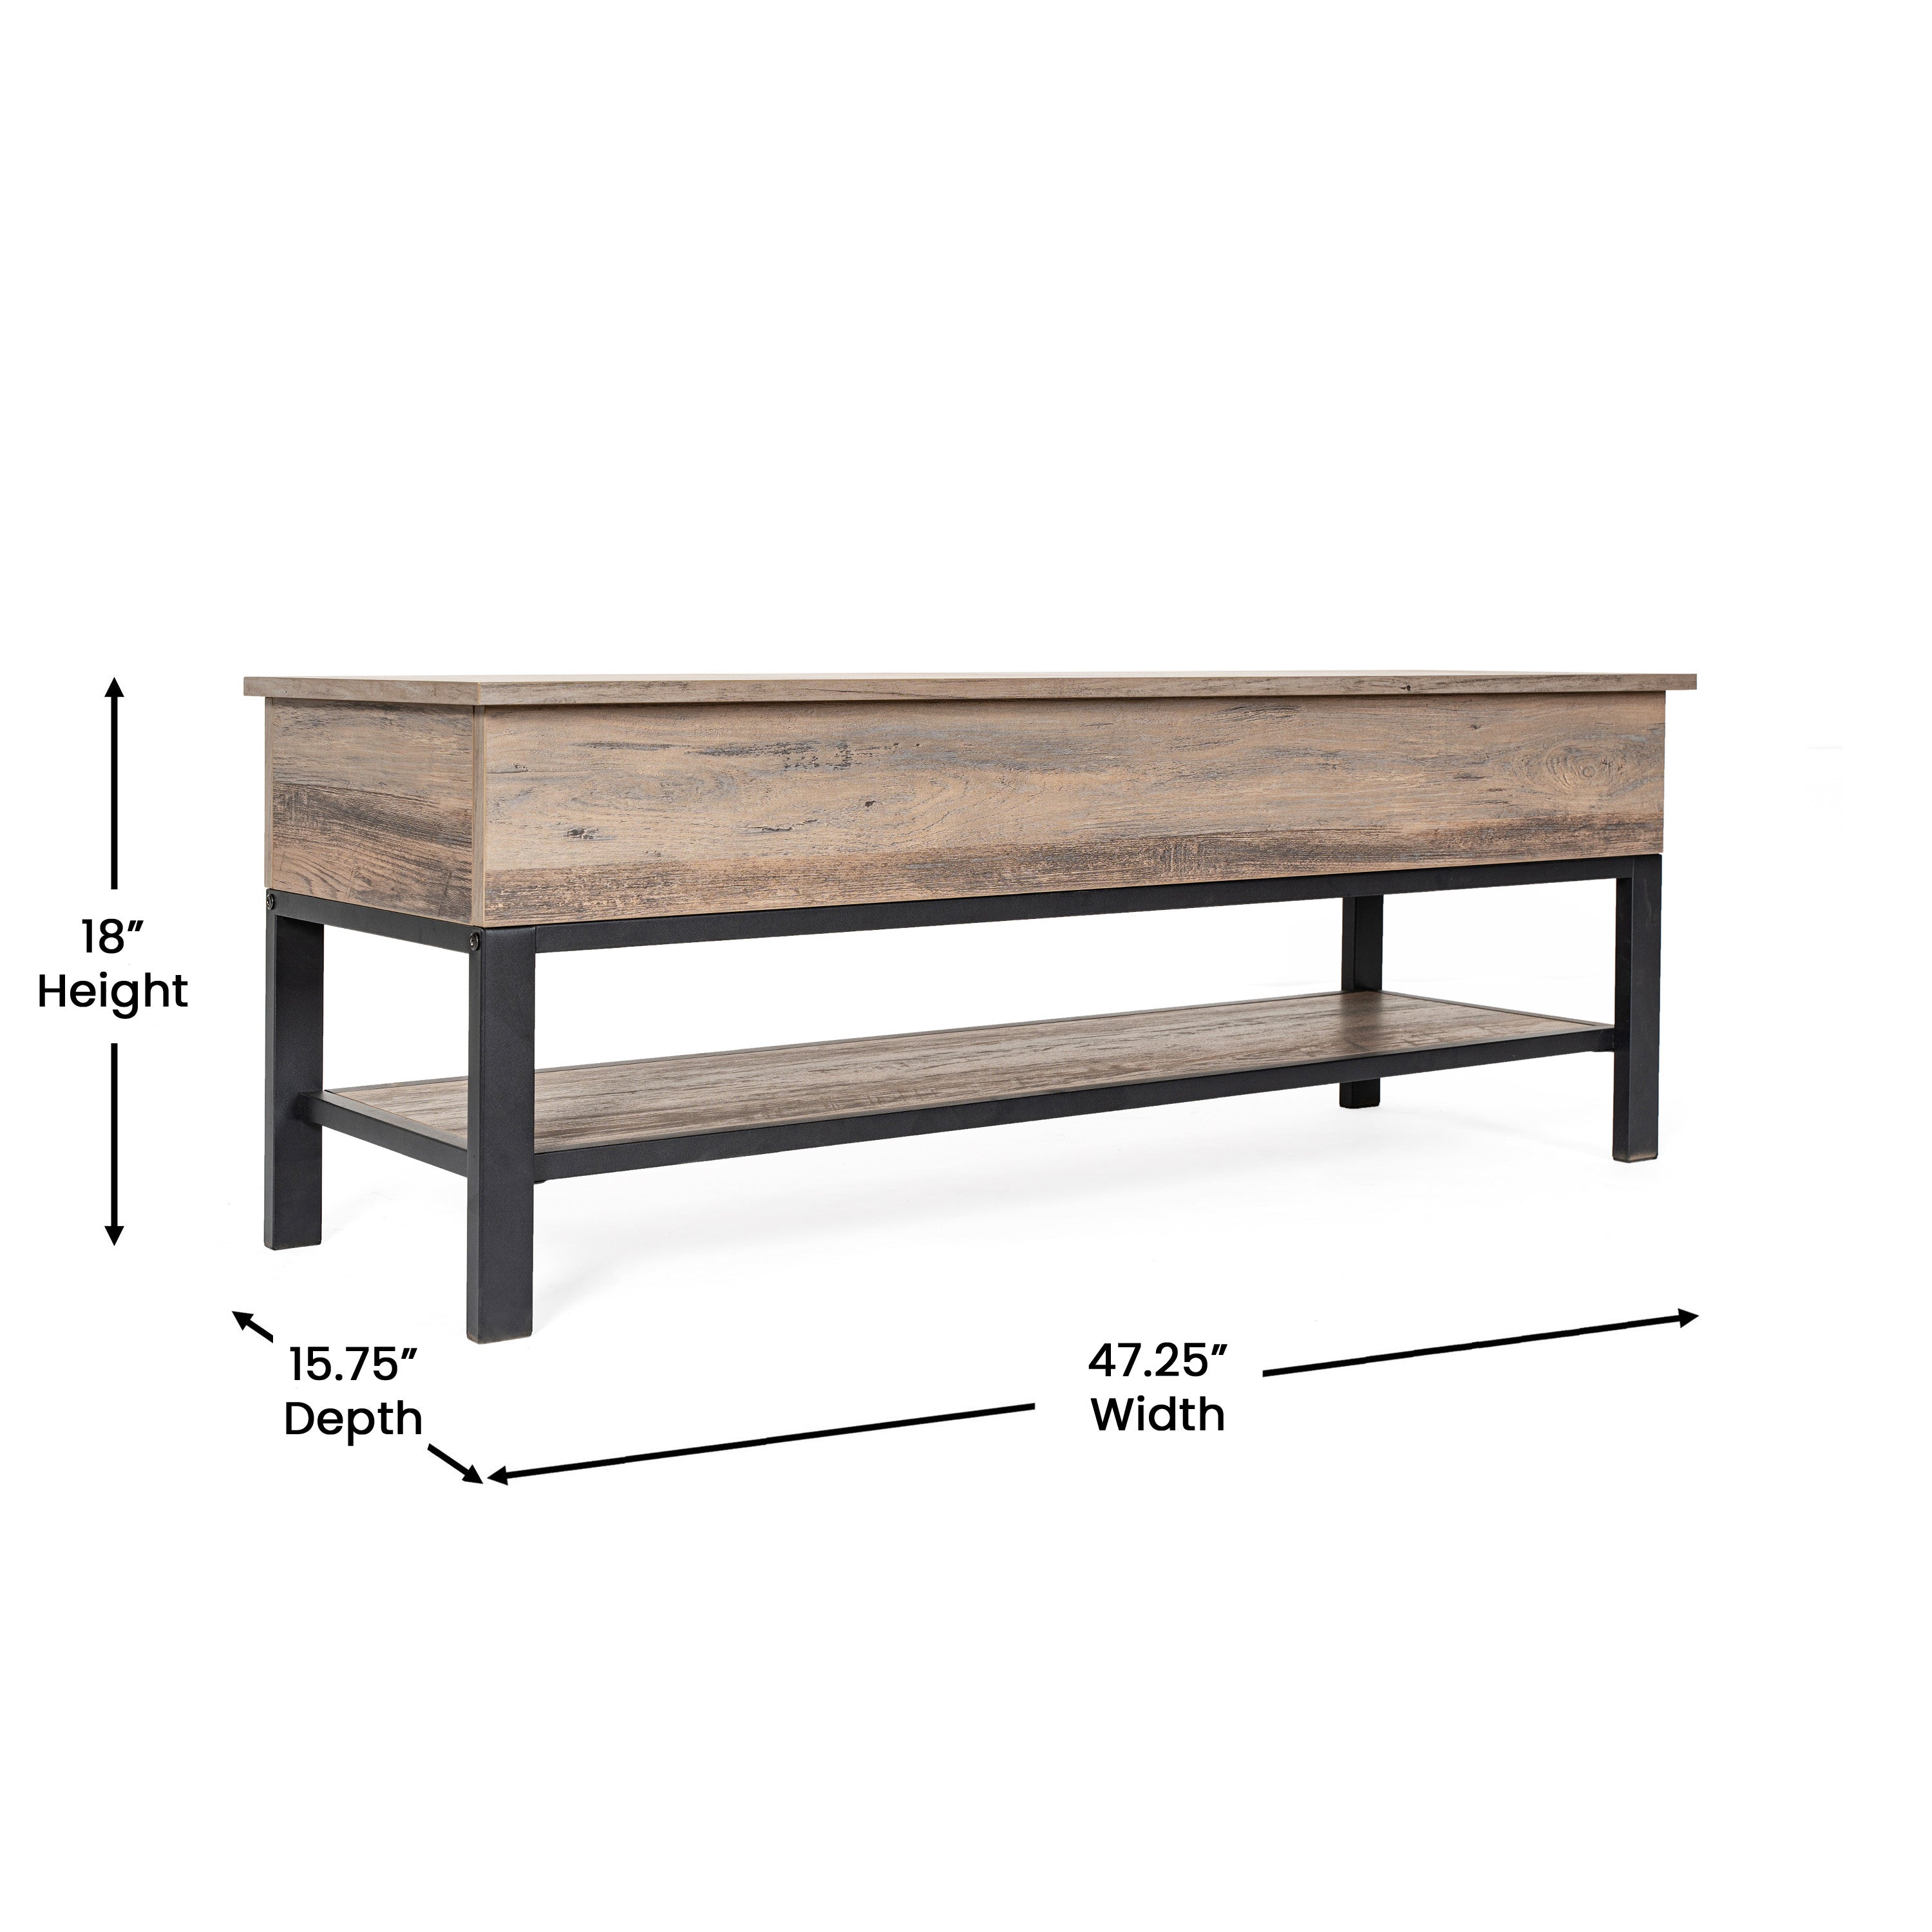 Wyatt Farmhouse Entryway Storage Bench with Lower Shelf Perfect for Entryway, Mudroom, or Bedroom-Entryway Bench-Flash Furniture-Wall2Wall Furnishings